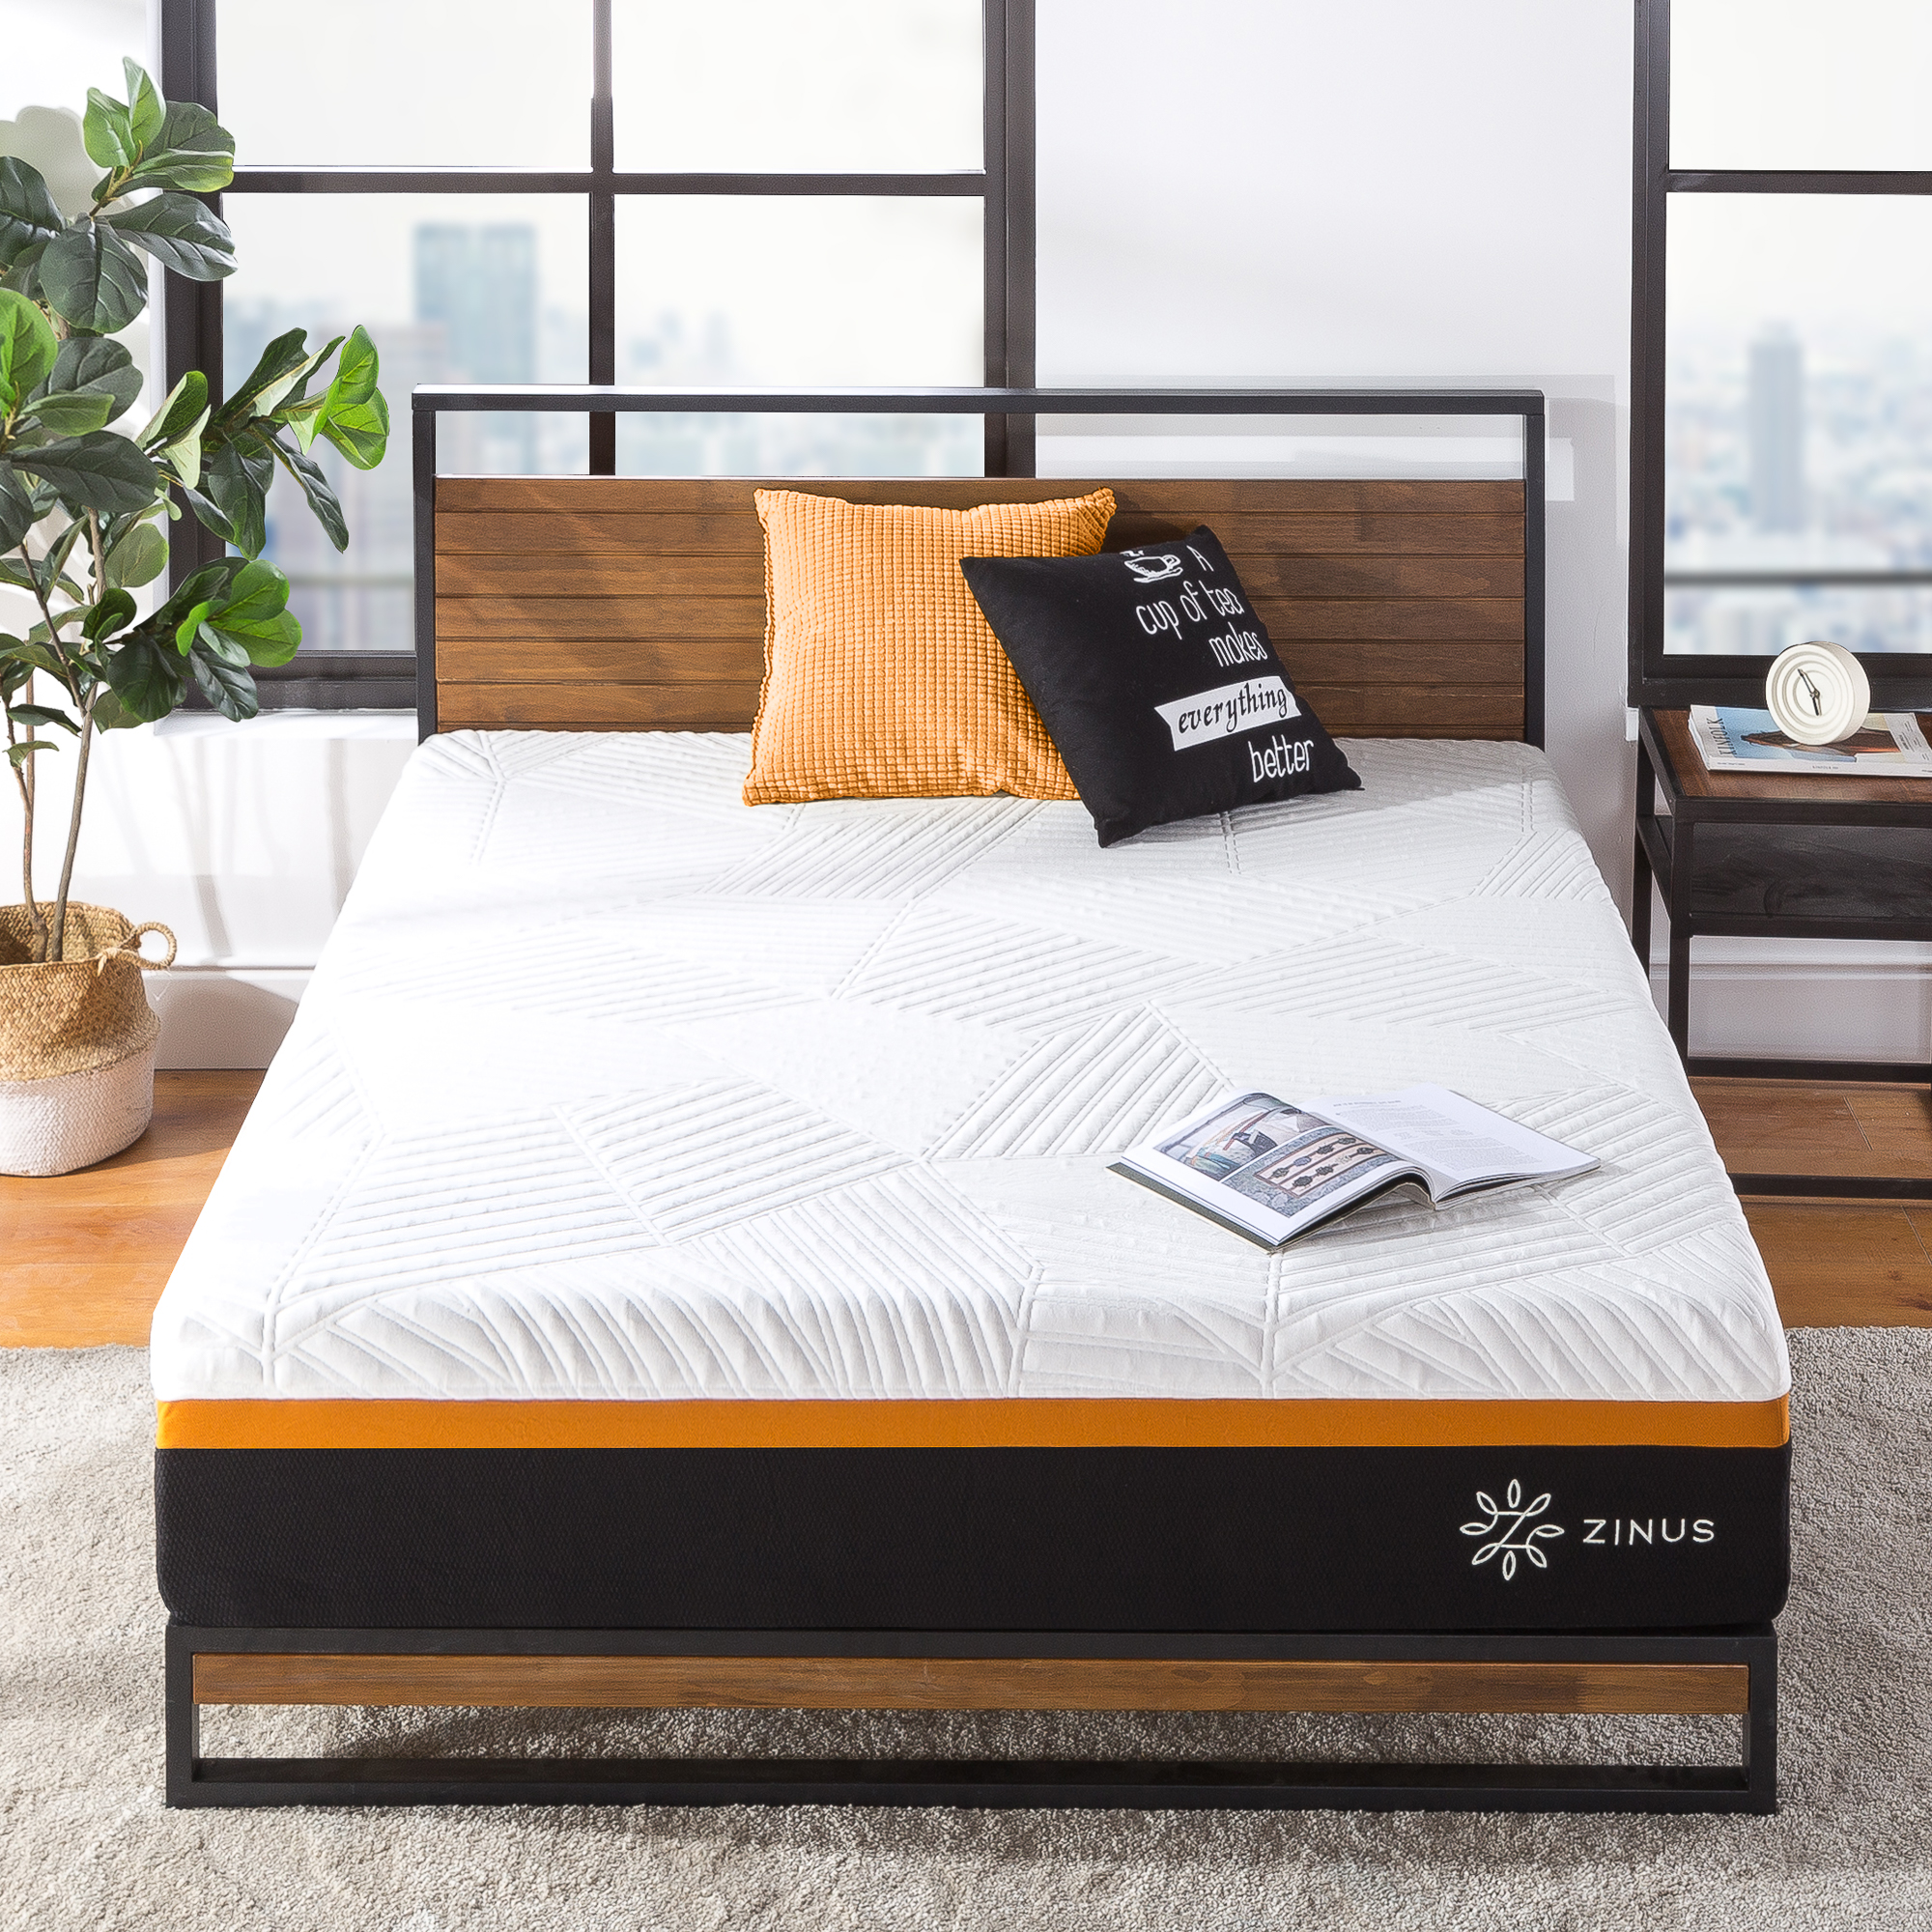 Zinus Cooling Copper ADAPTIVE® 12" Copper Memory Foam Pocket Spring Hybrid Mattress, Queen - image 1 of 10